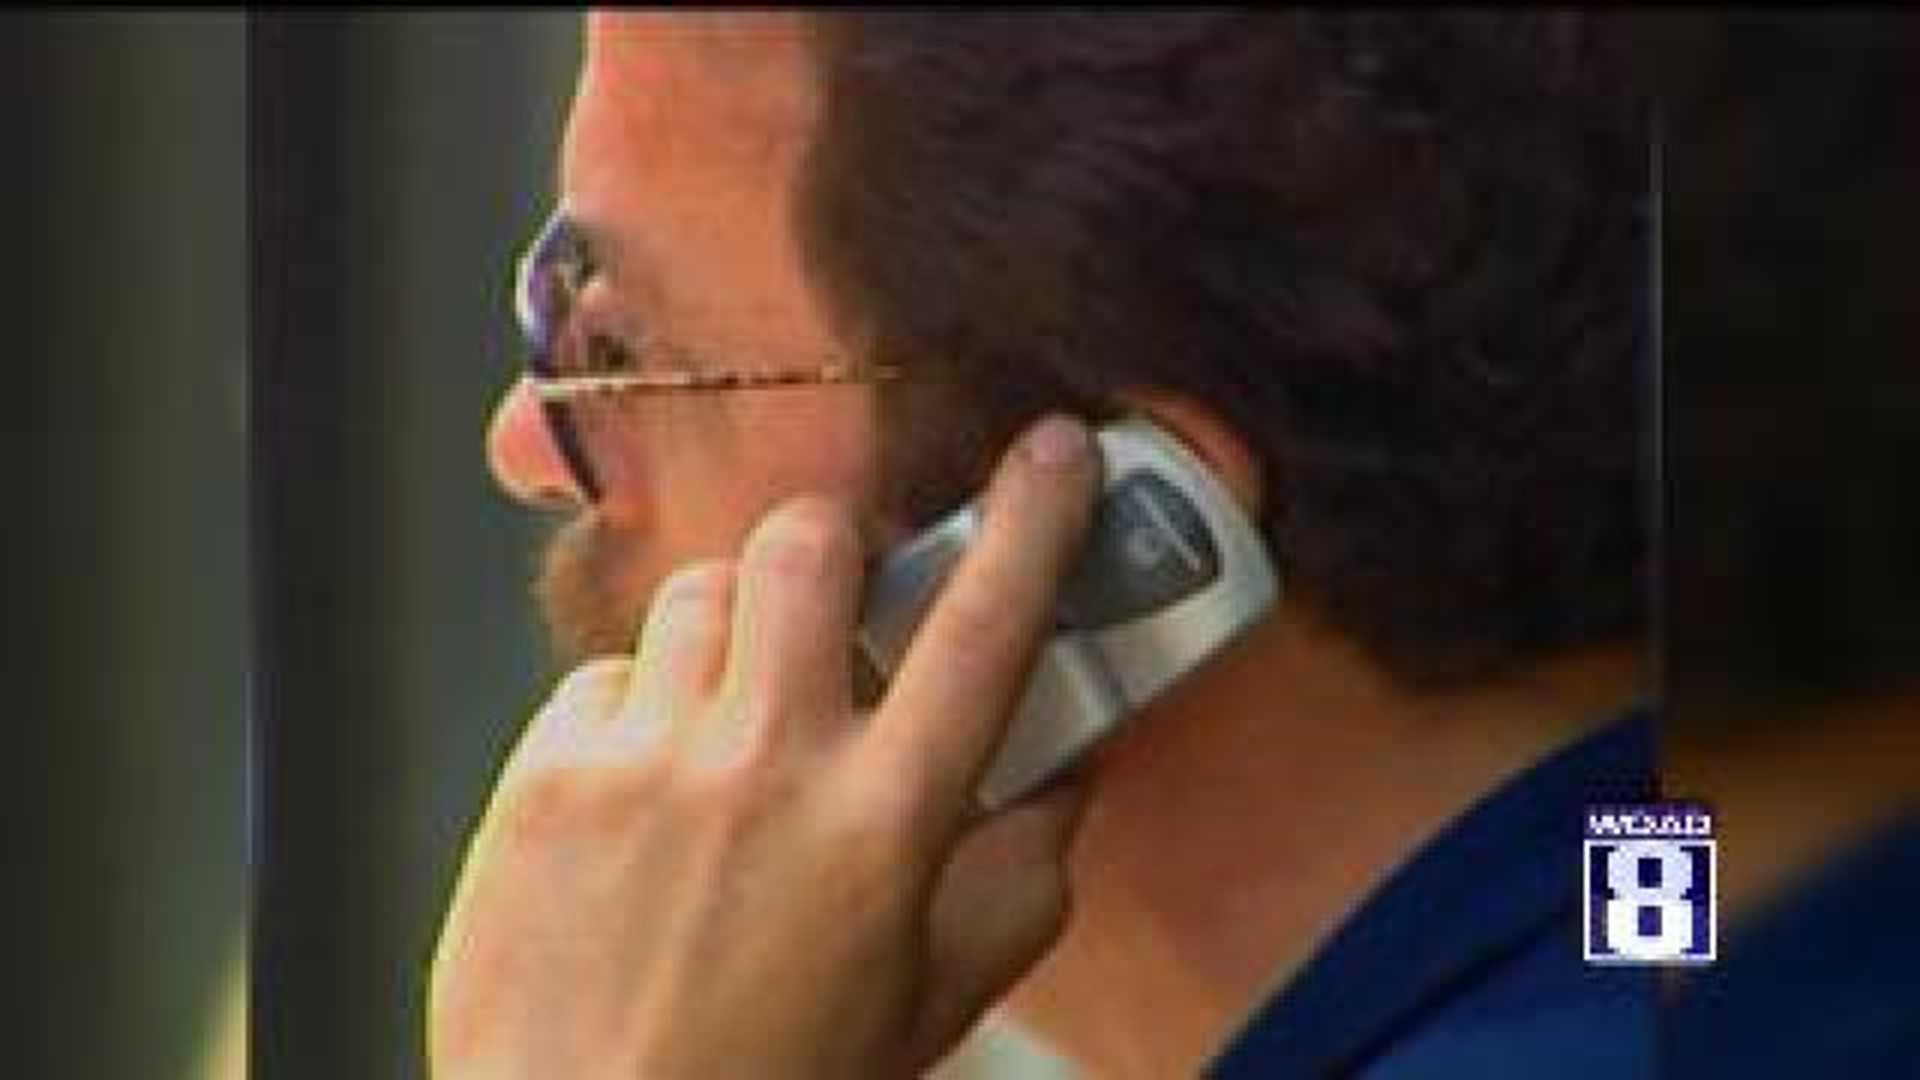 Illinois cell phone taxes among highest in U.S.